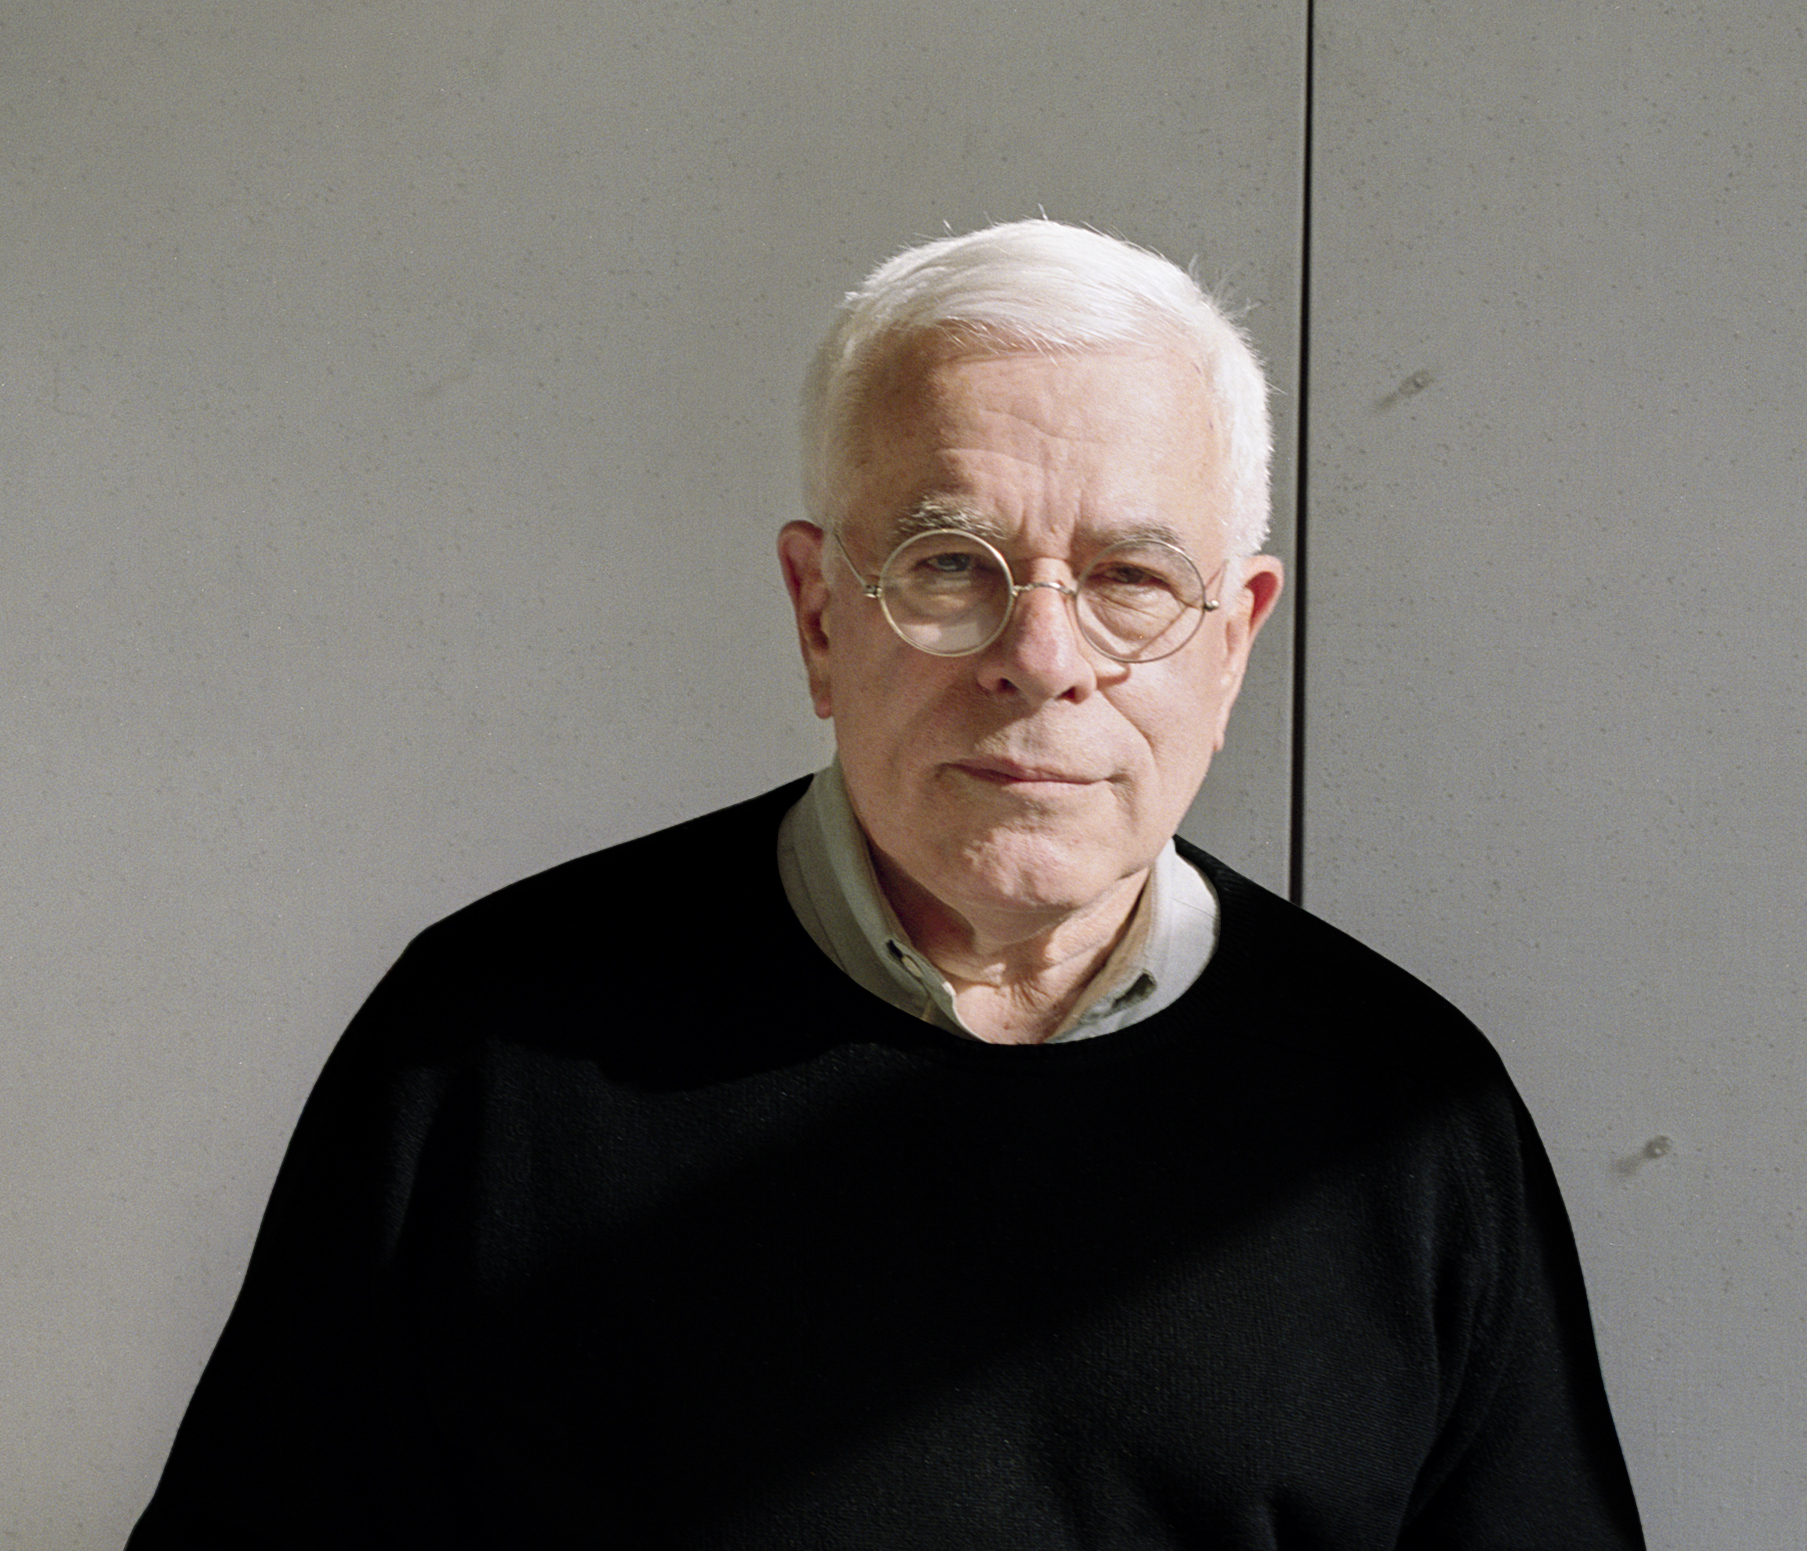 Gallery of peter eisenman architect theorist and educator marked by deconstructivism